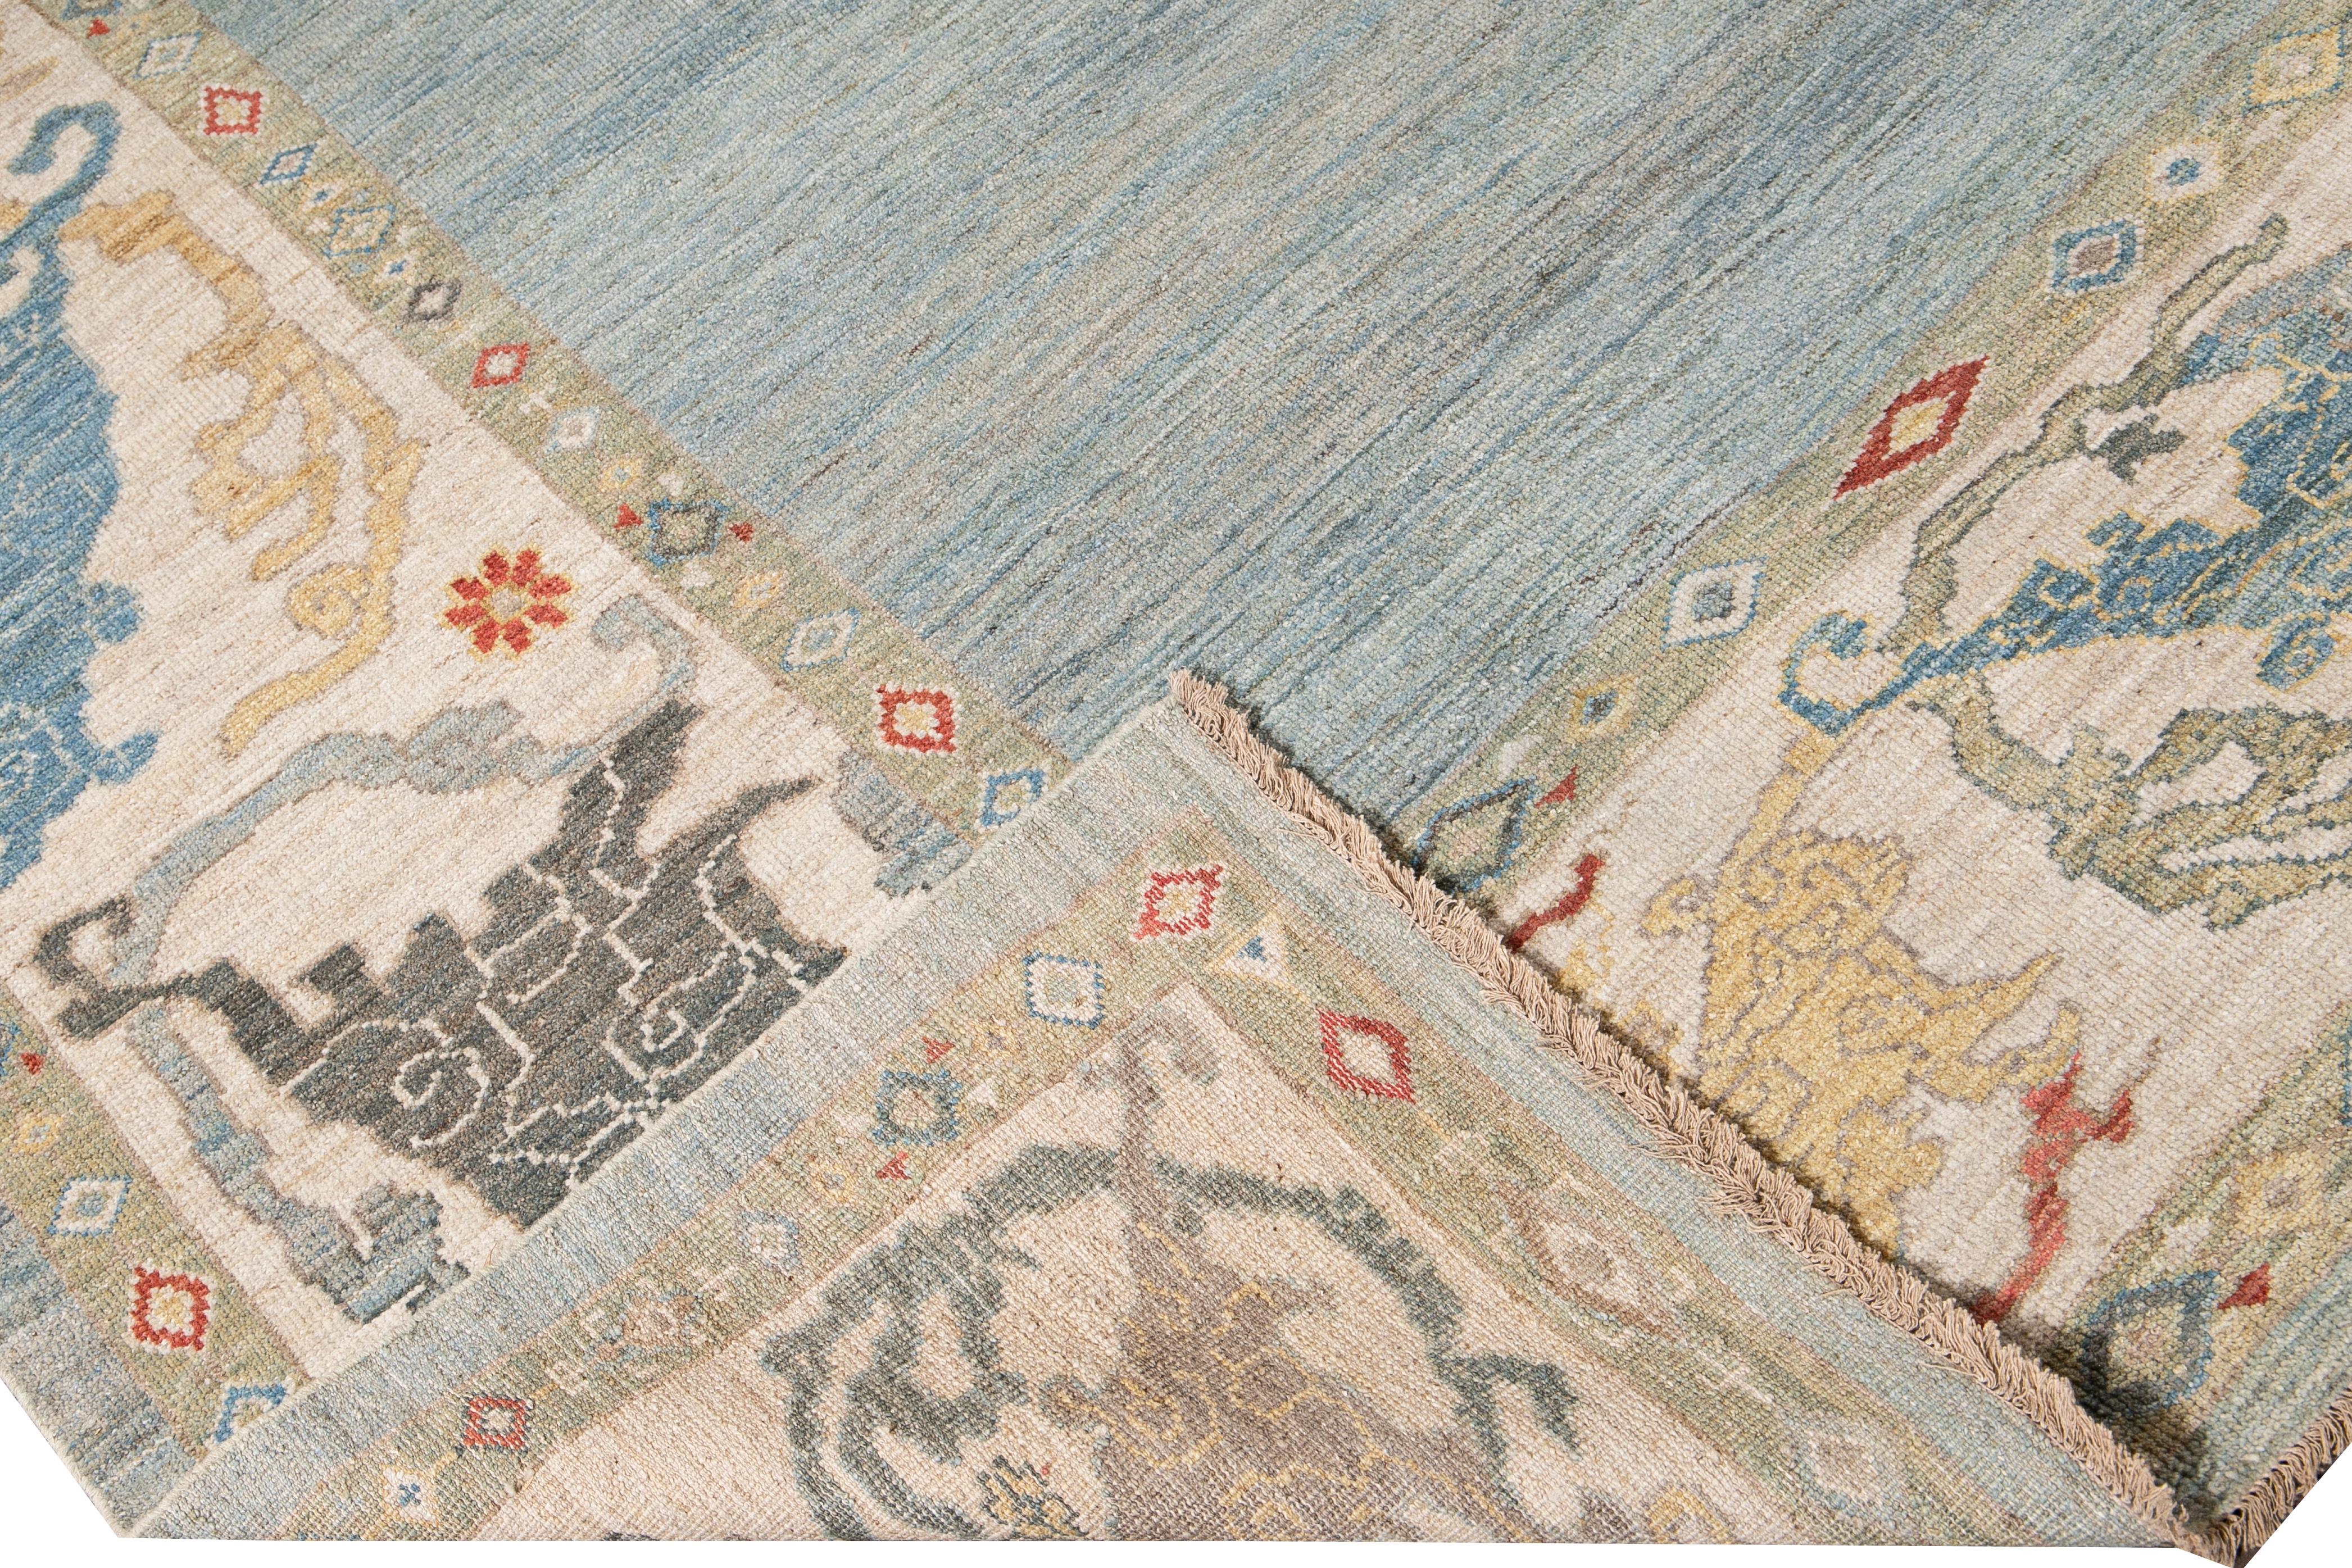 Beautiful modern oversize Sultanabad hand-knotted wool rug with a solid blue field. This Sultanabad rug has a beige frame and golden brown, blue, and orange accents in a gorgeous all-over Classic geometric floral design.

This rug measures: 11'10